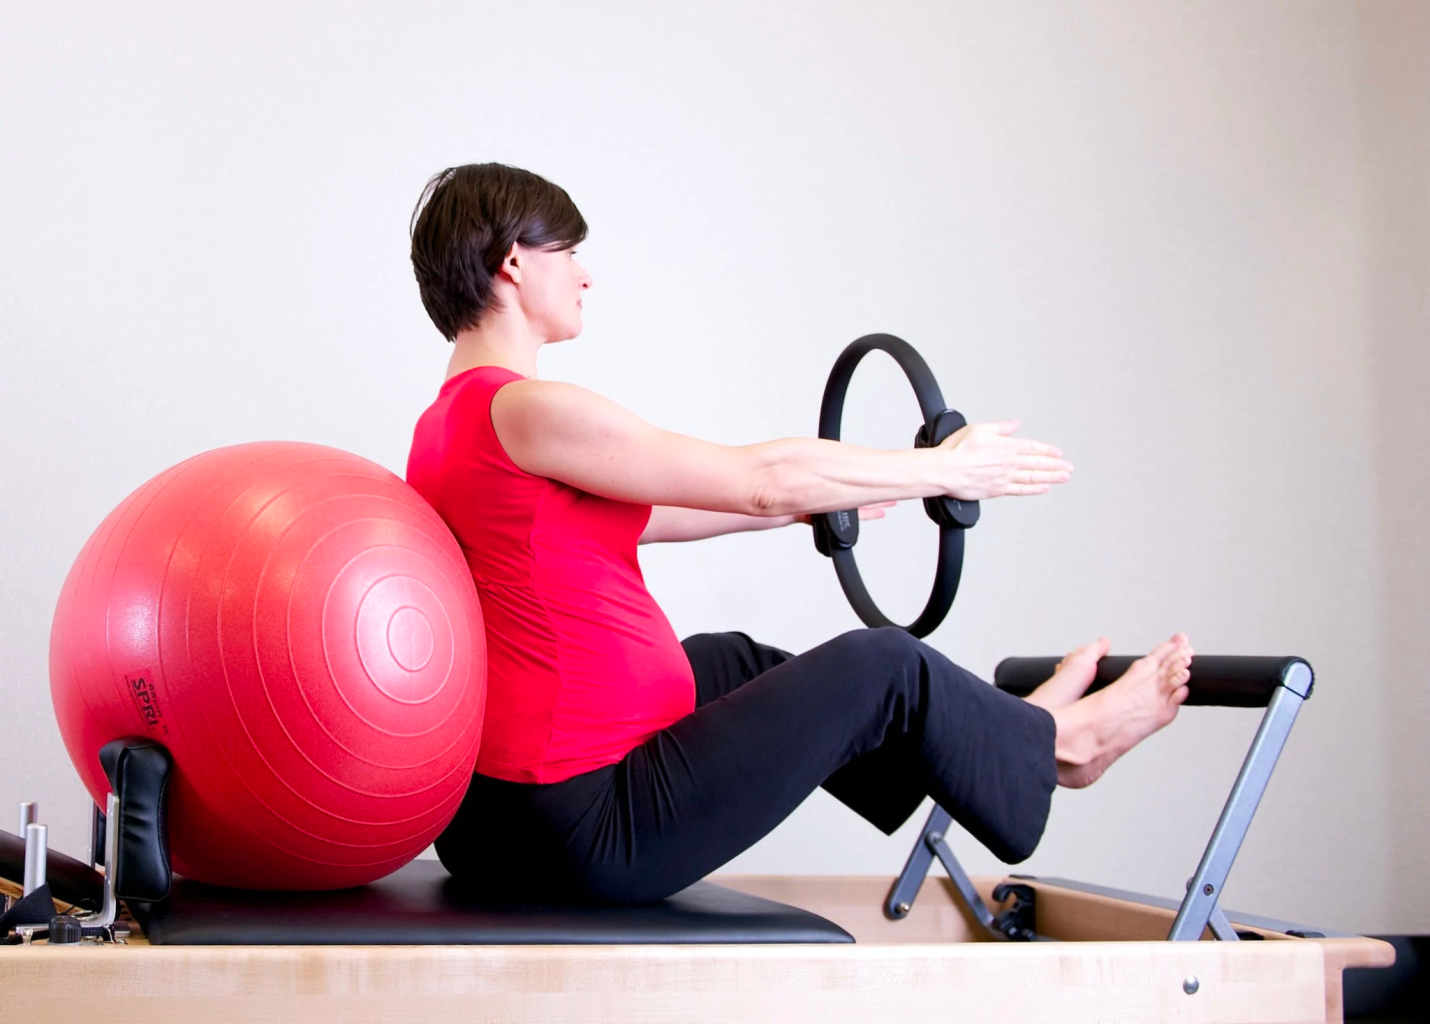 A woman uses exercise equipment while working out.